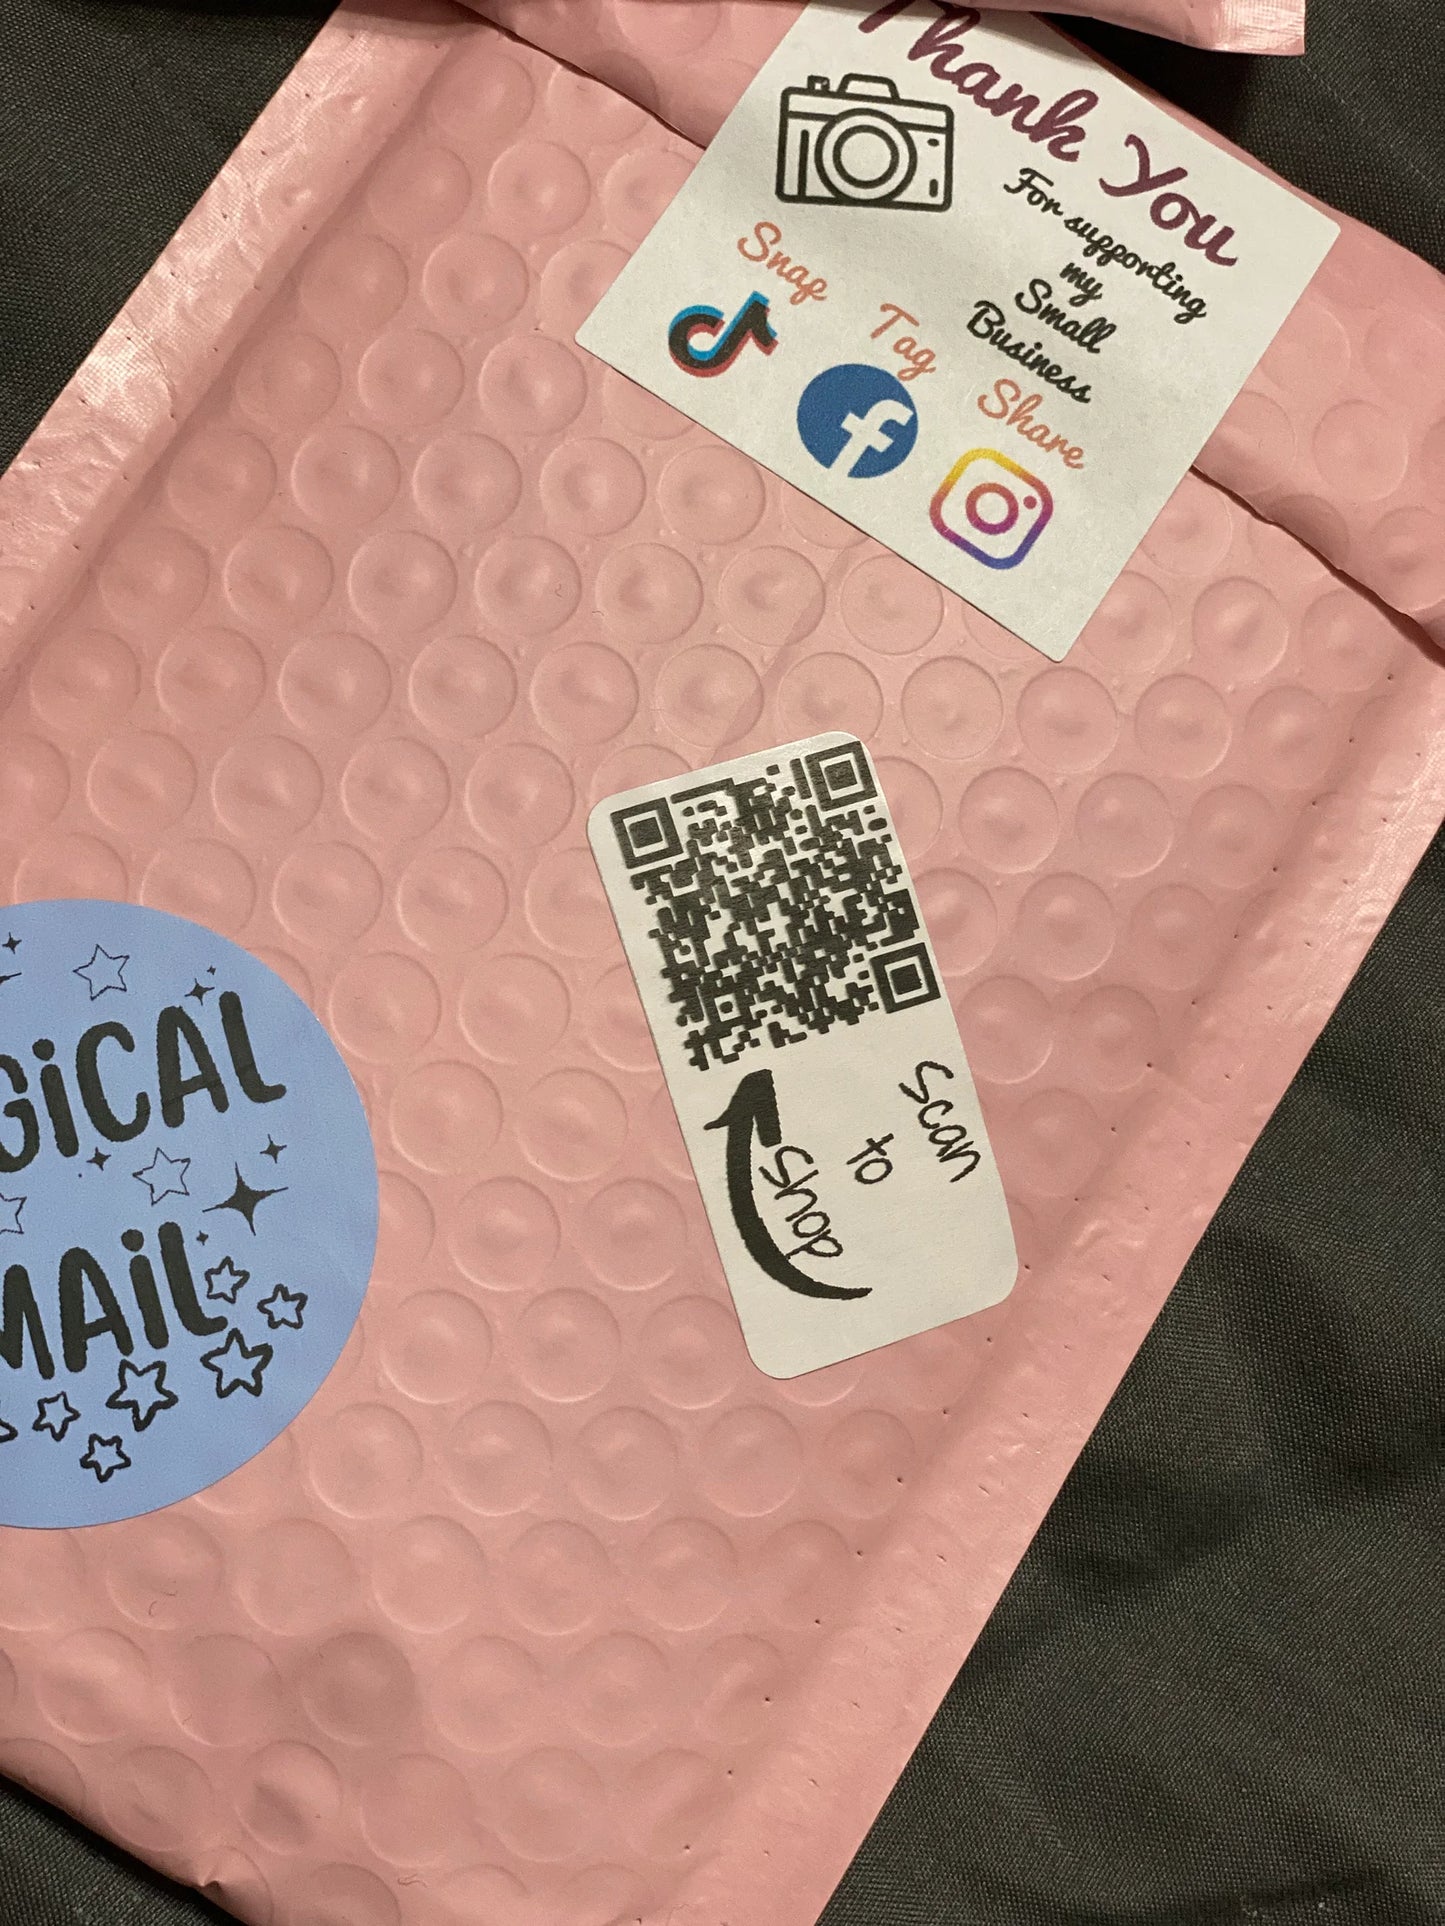 QR code Scan to Shop Stickers